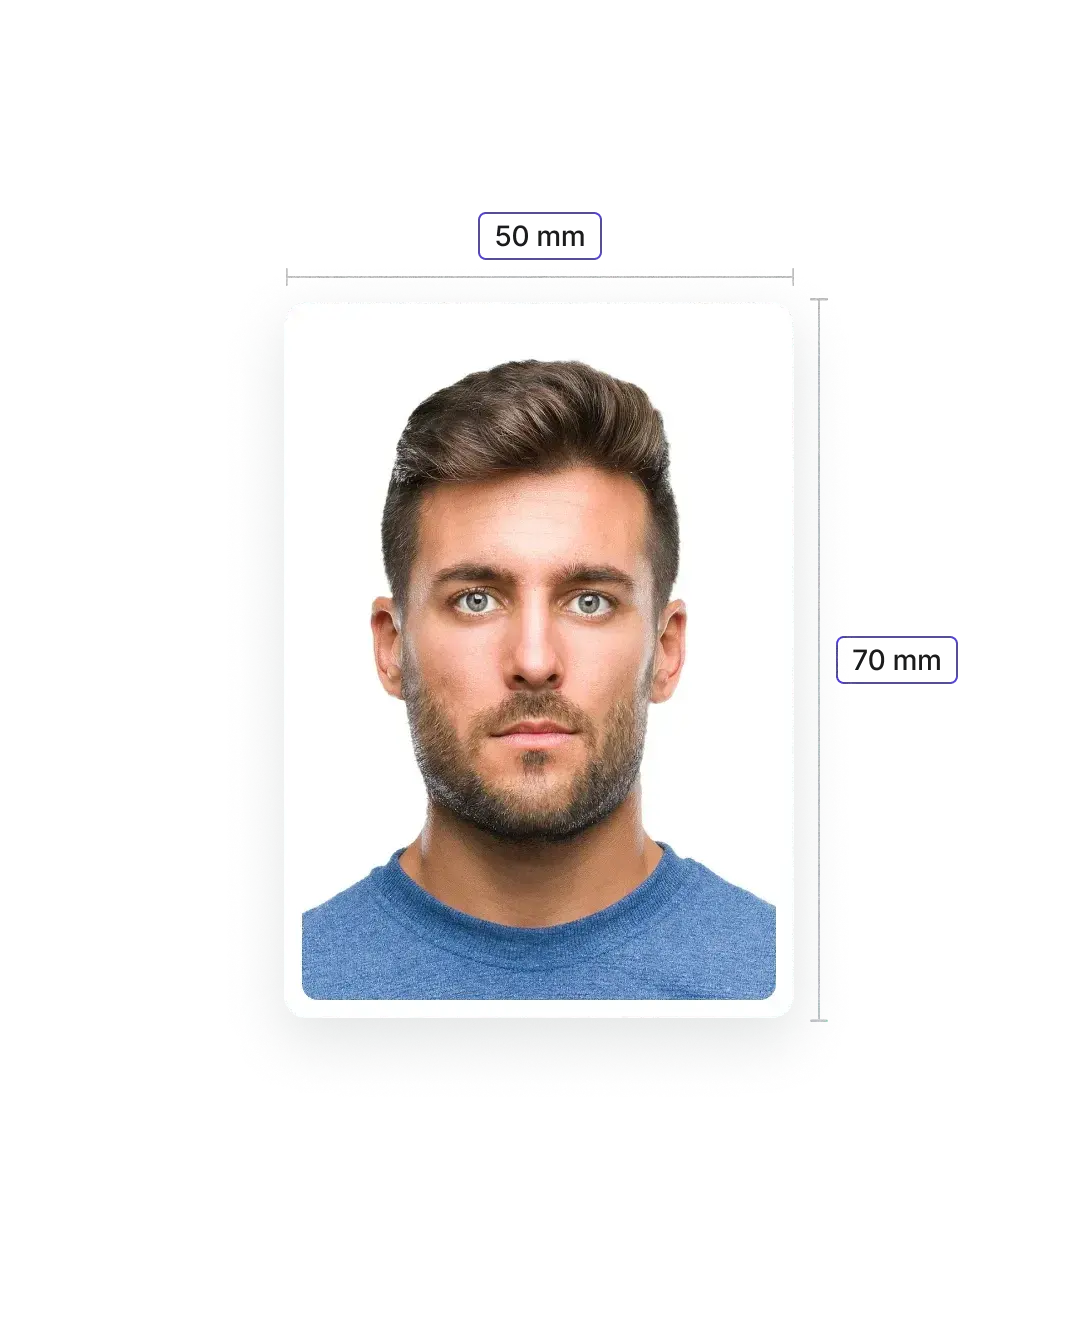 Photo for Canadian Passport - Size & Requirements